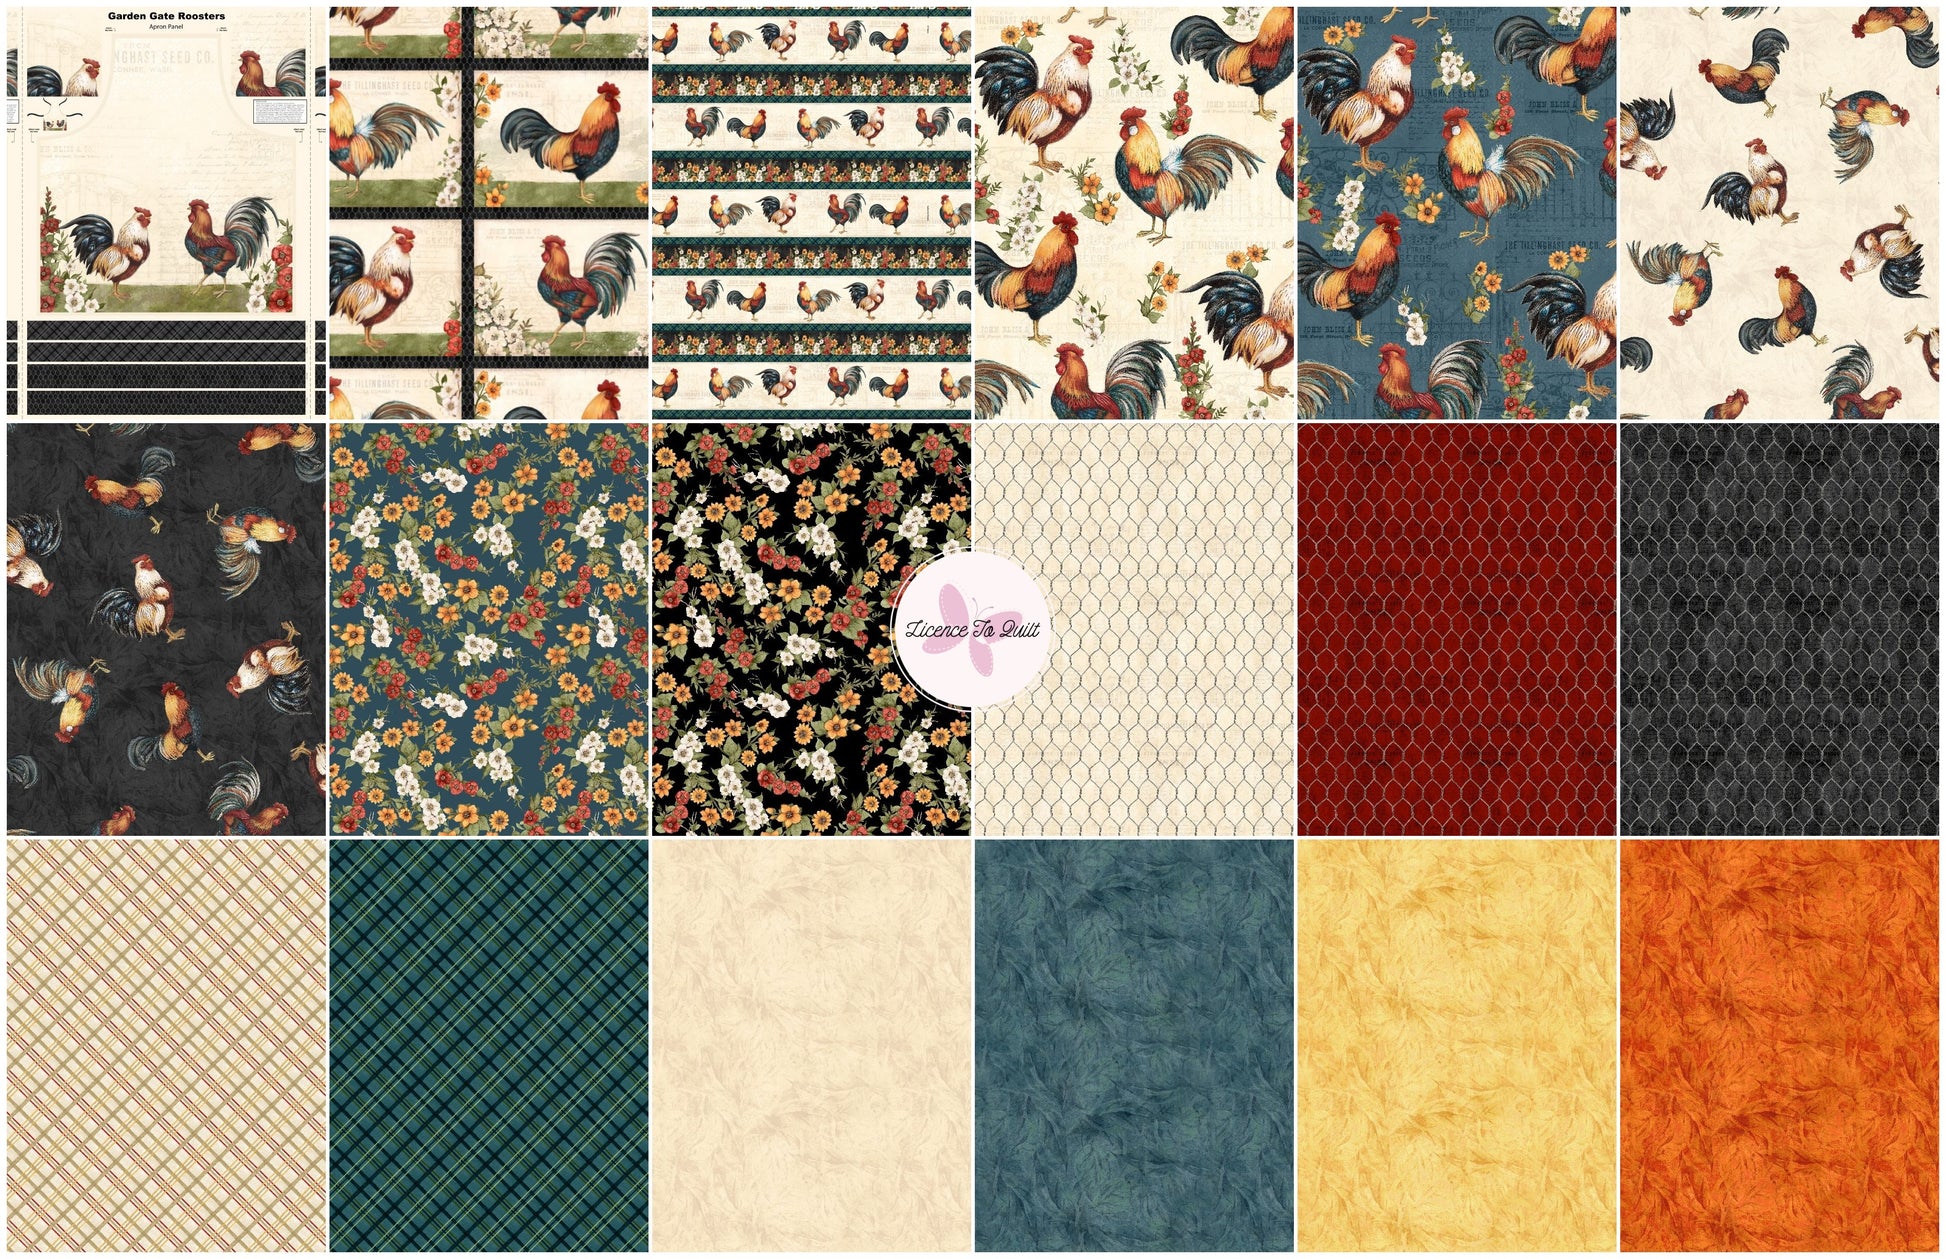 Garden Gate Roosters - Feather Texture Cream - Licence To Quilt